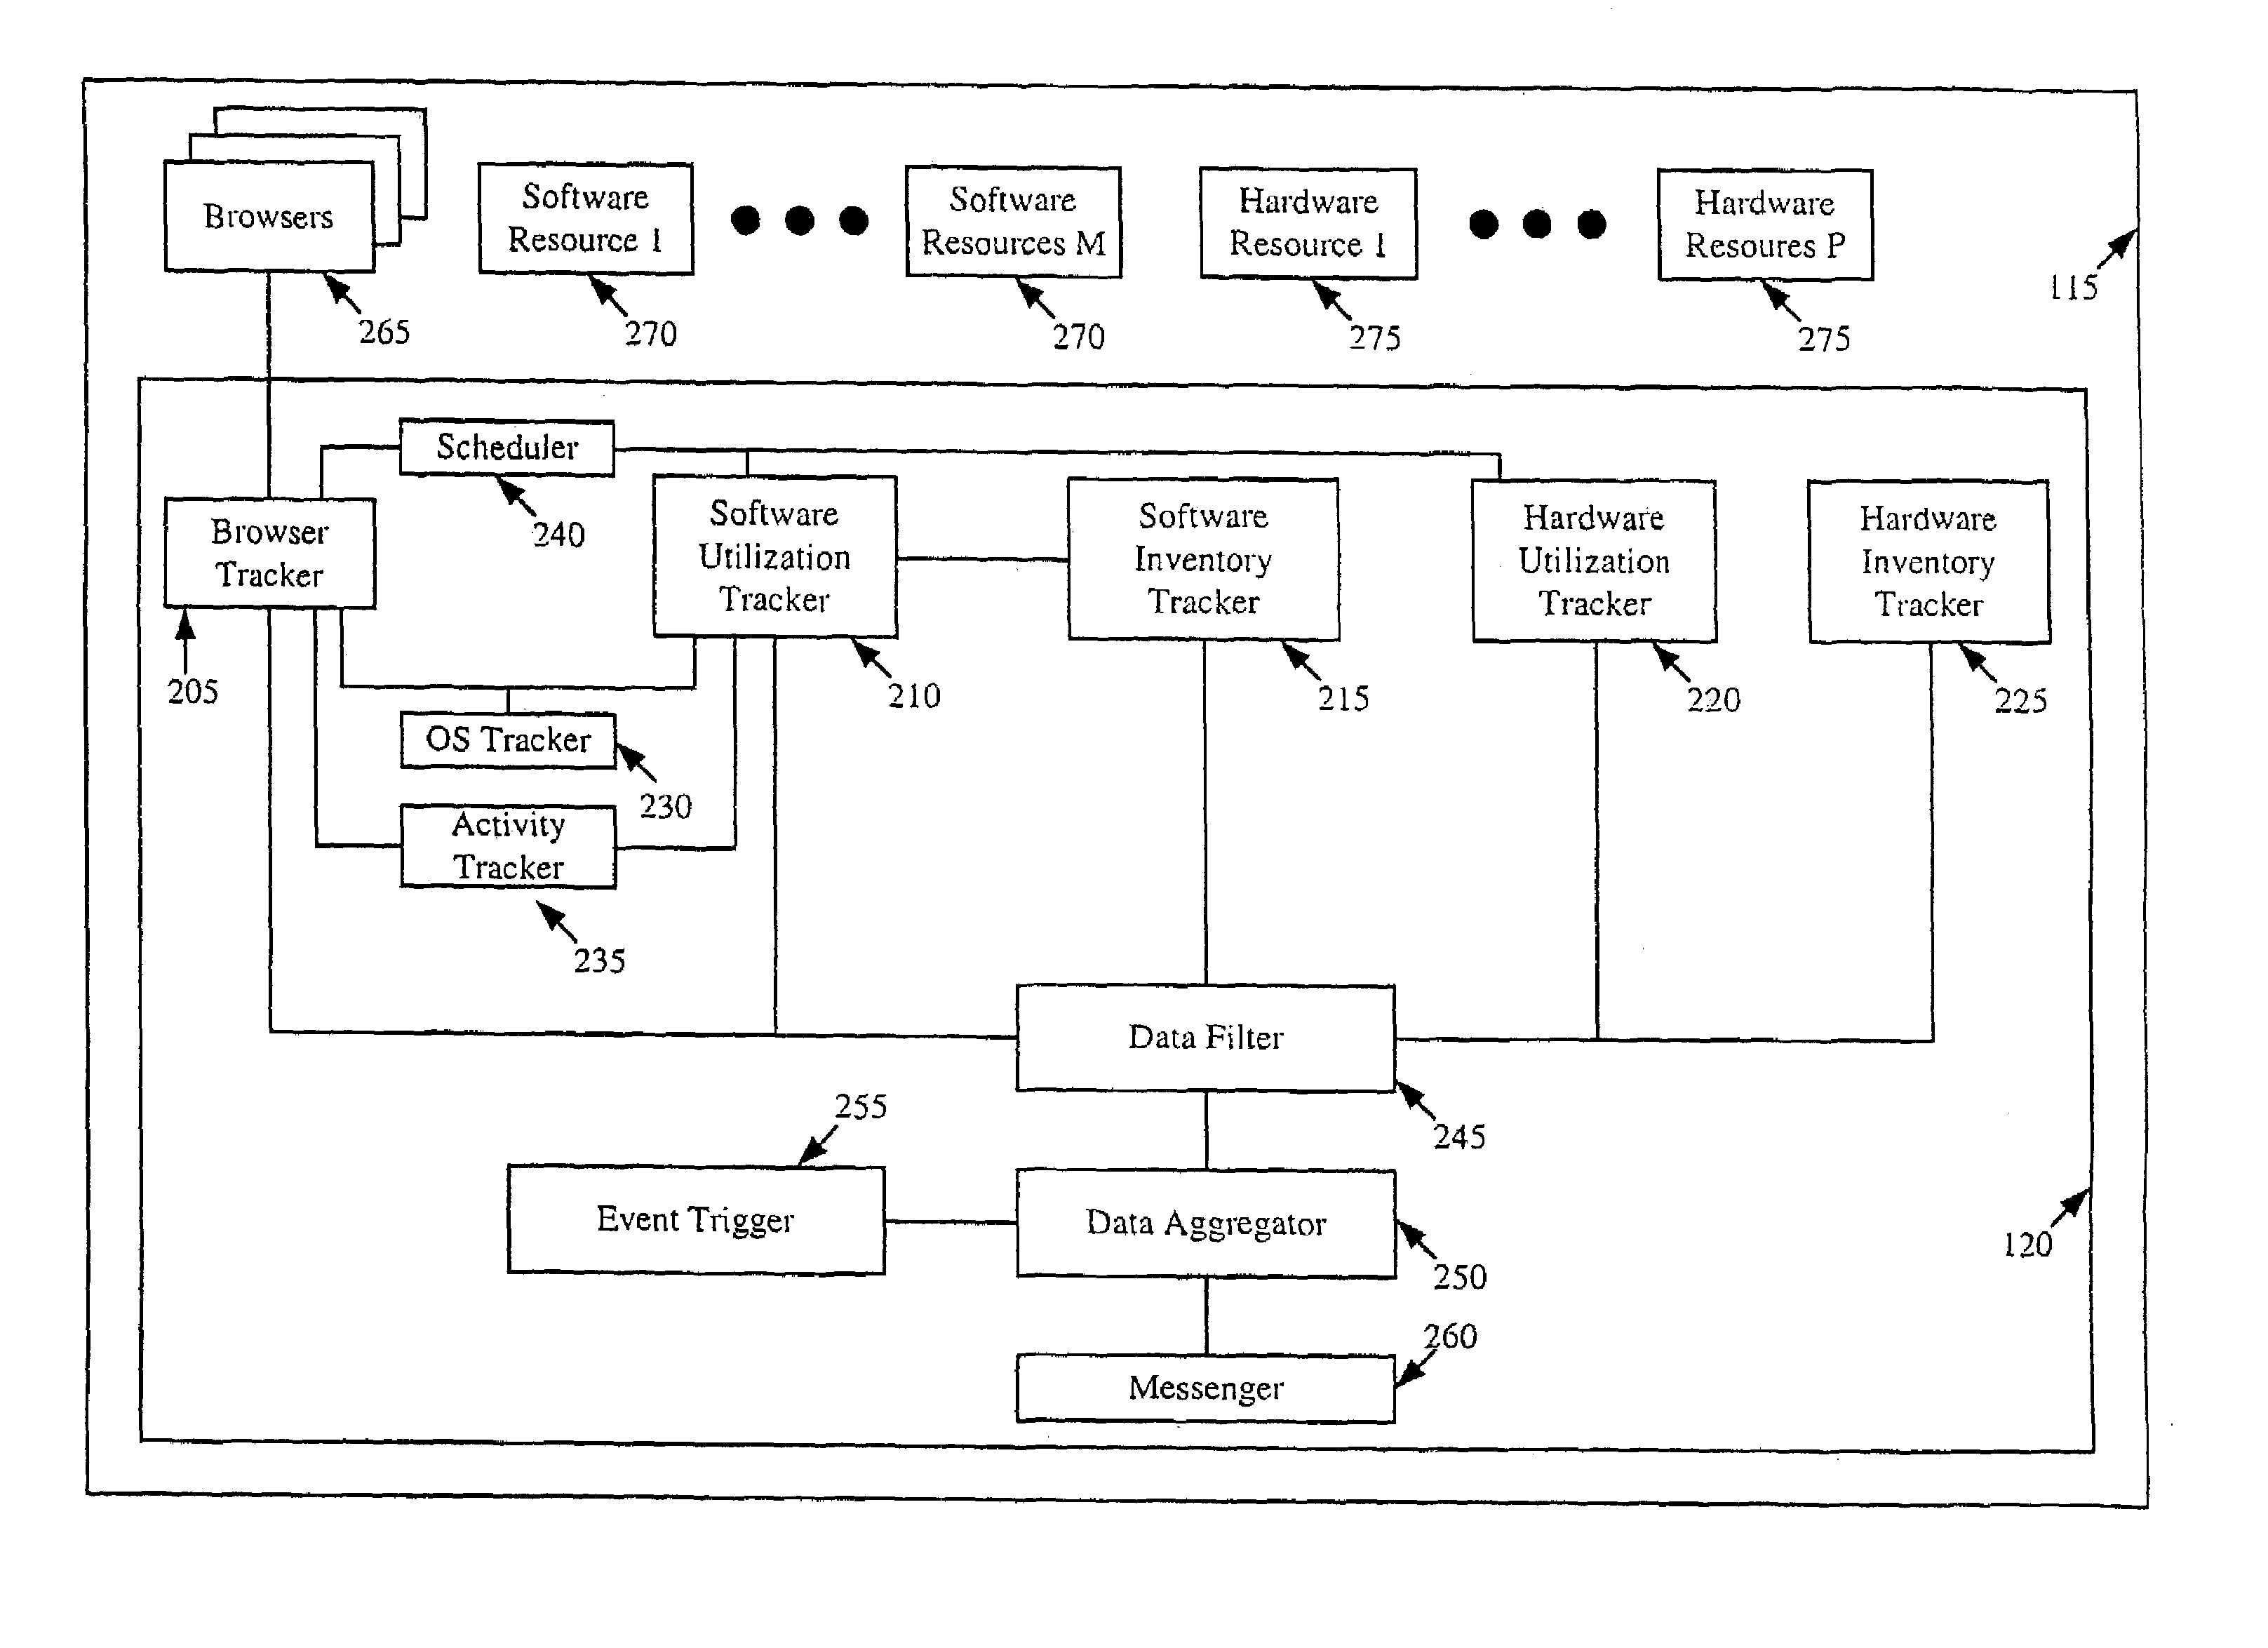 System for managing resources